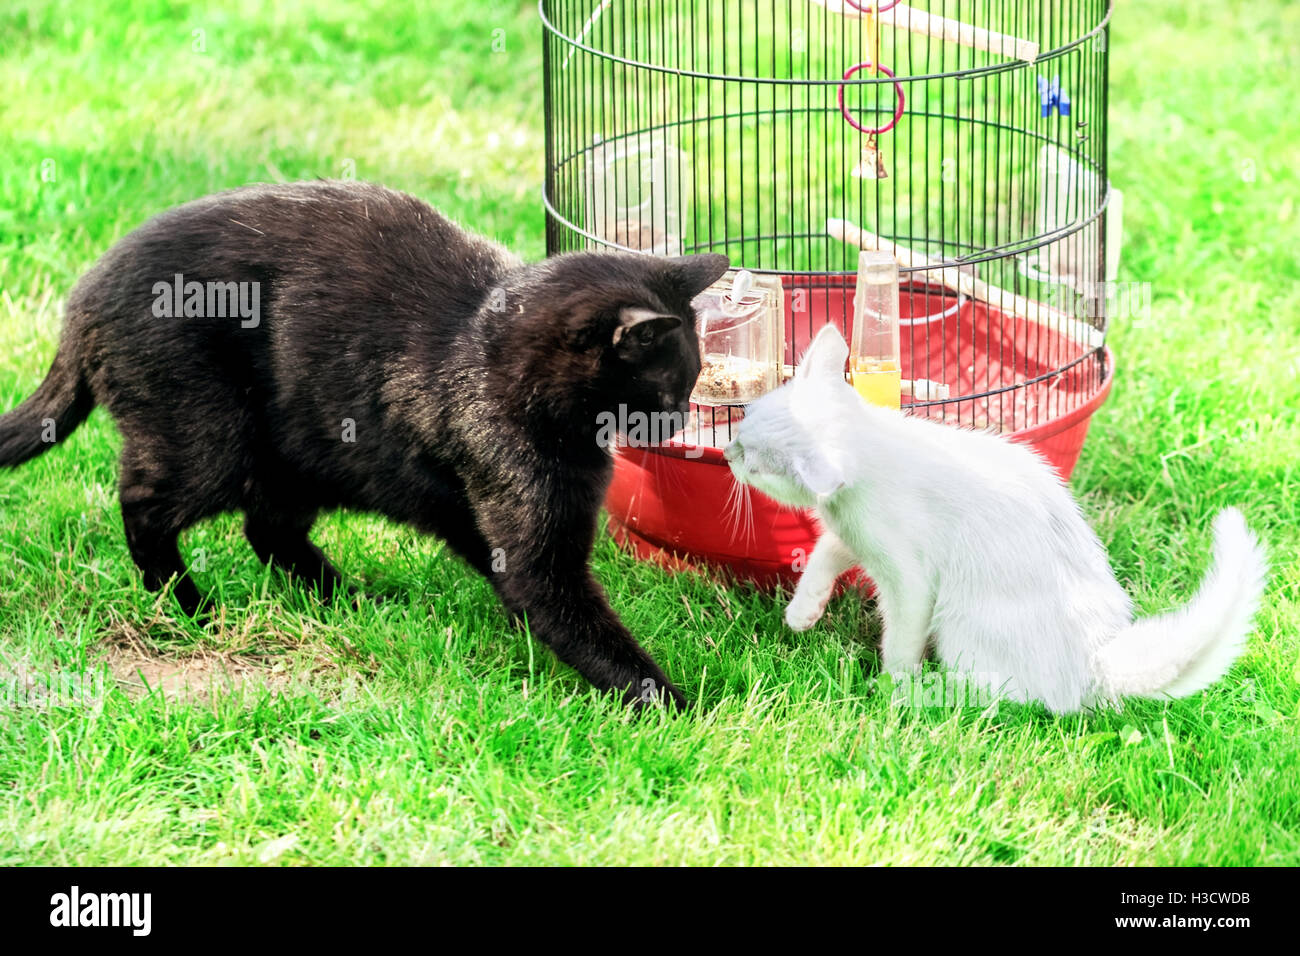 Two cats black and white about bird cages on green summer grass Stock Photo